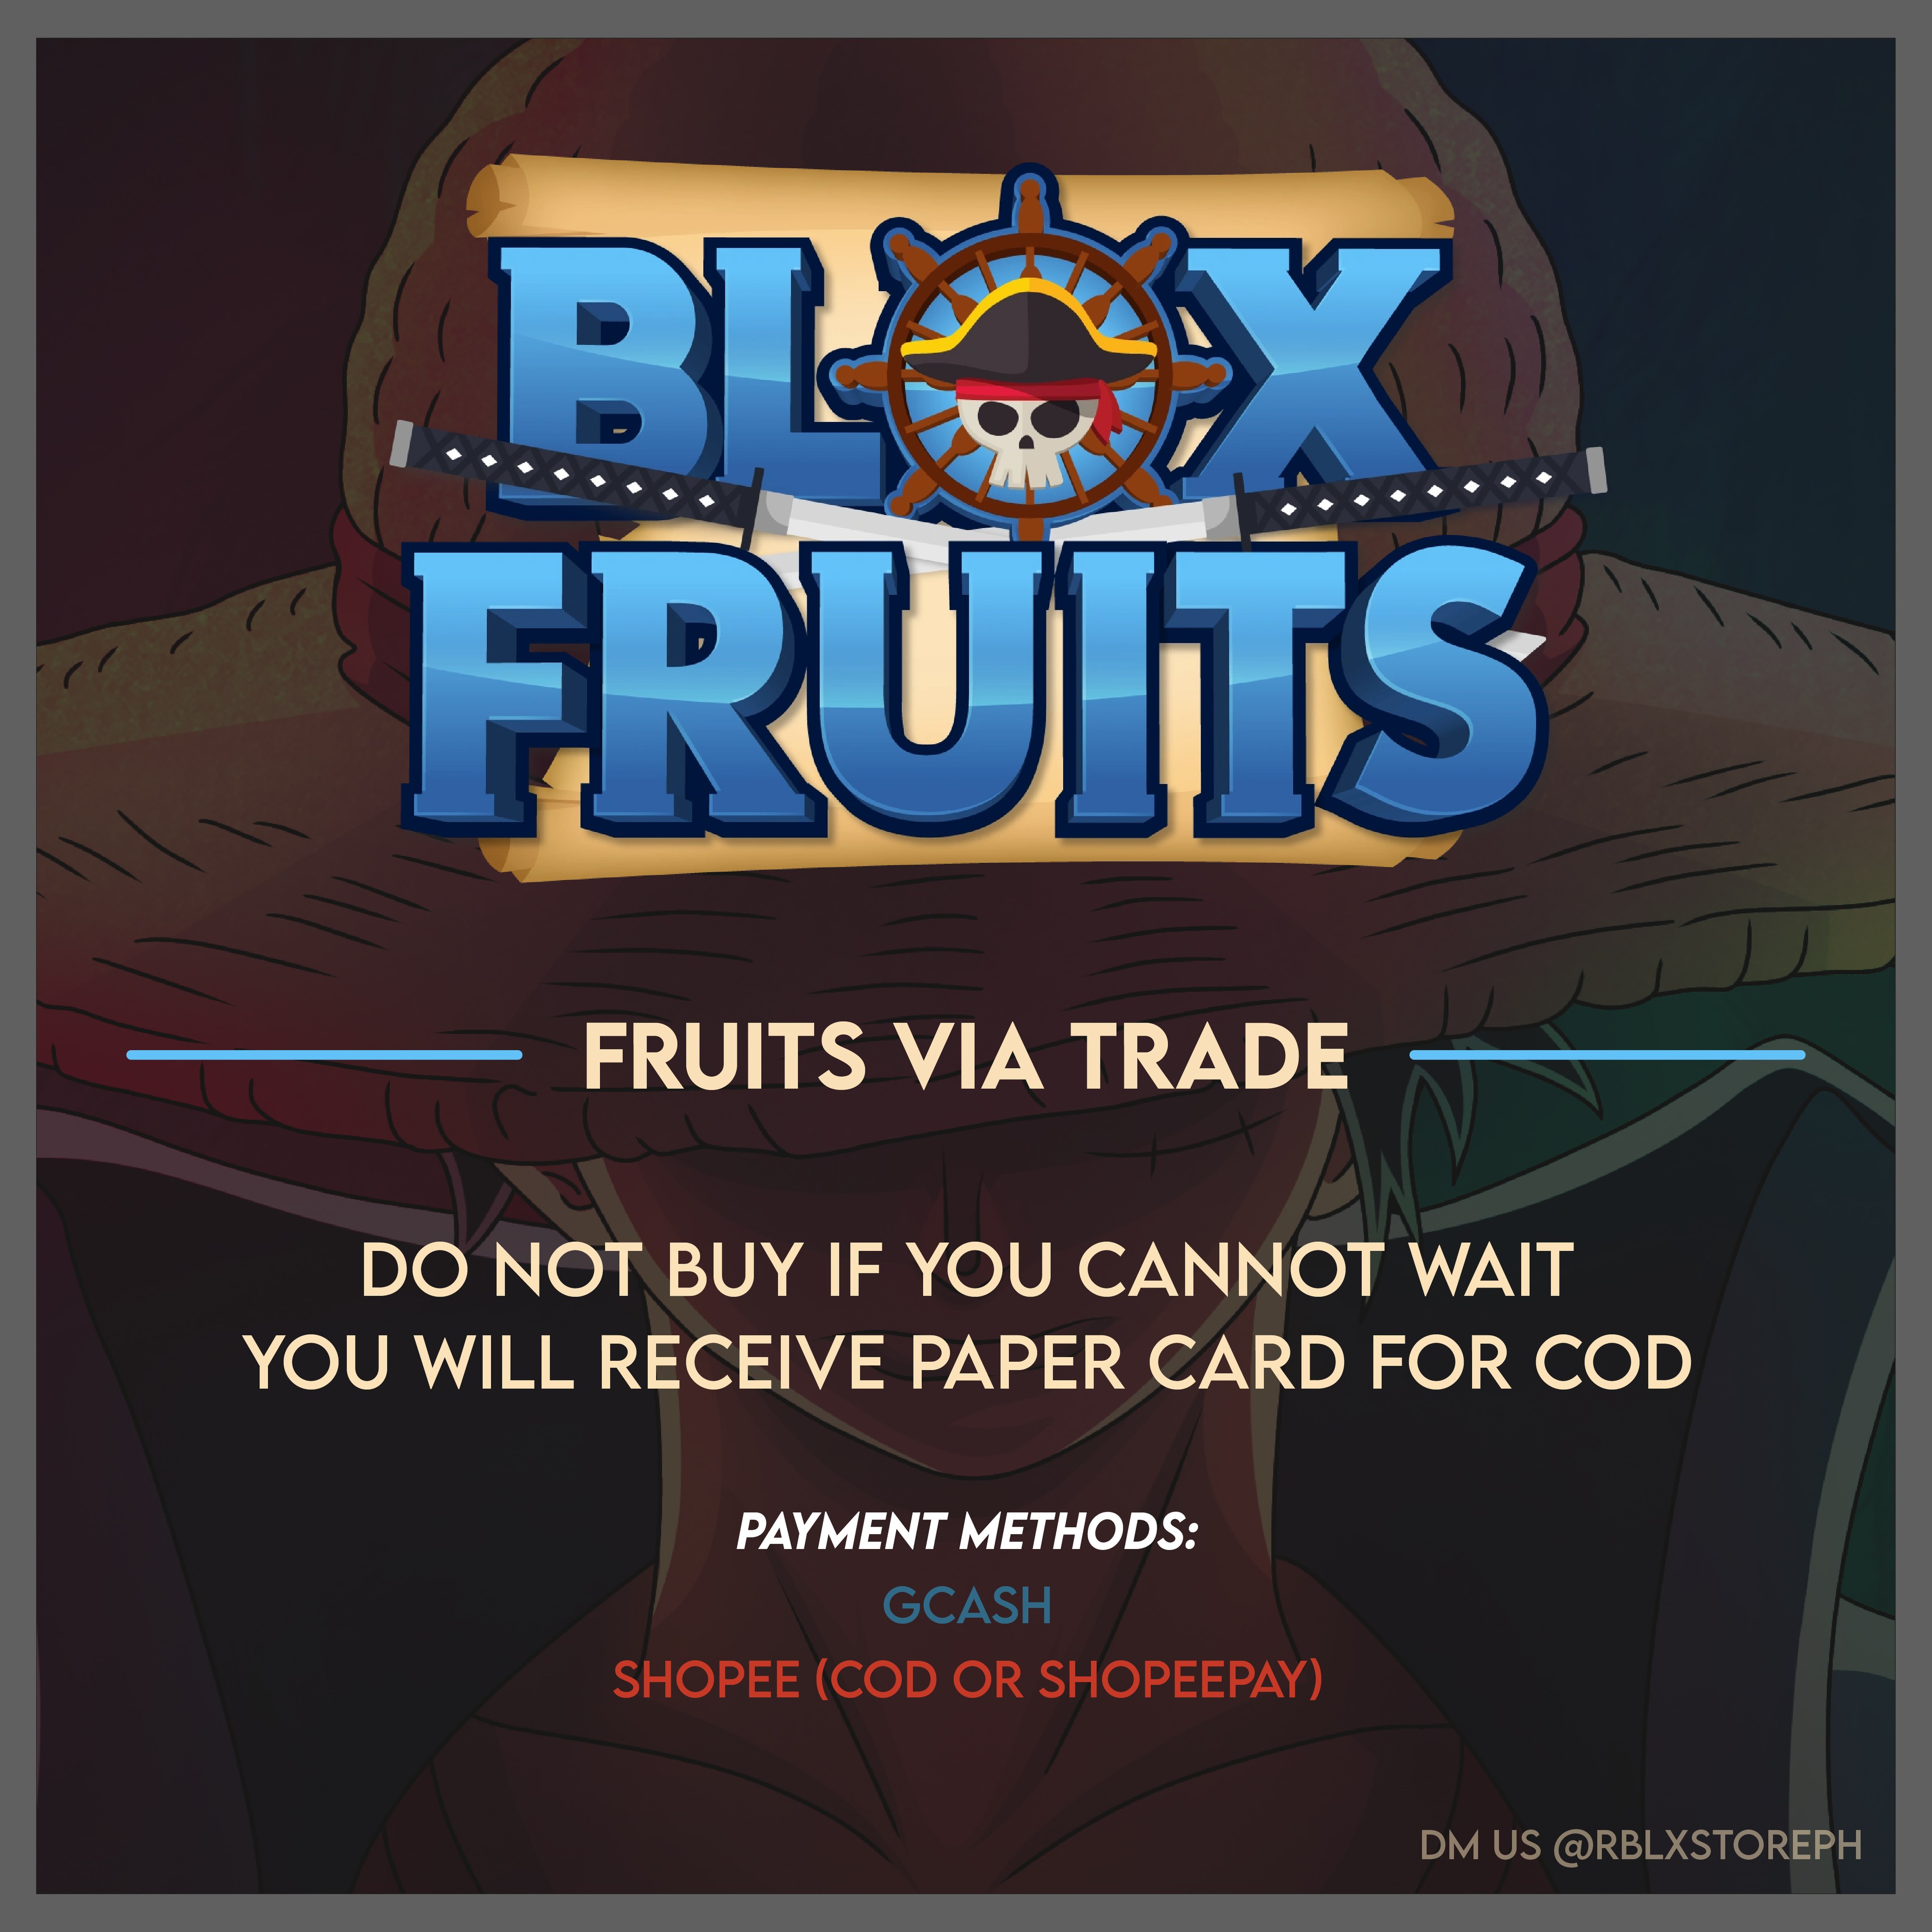 How to Trade Blox Fruits - Update 15